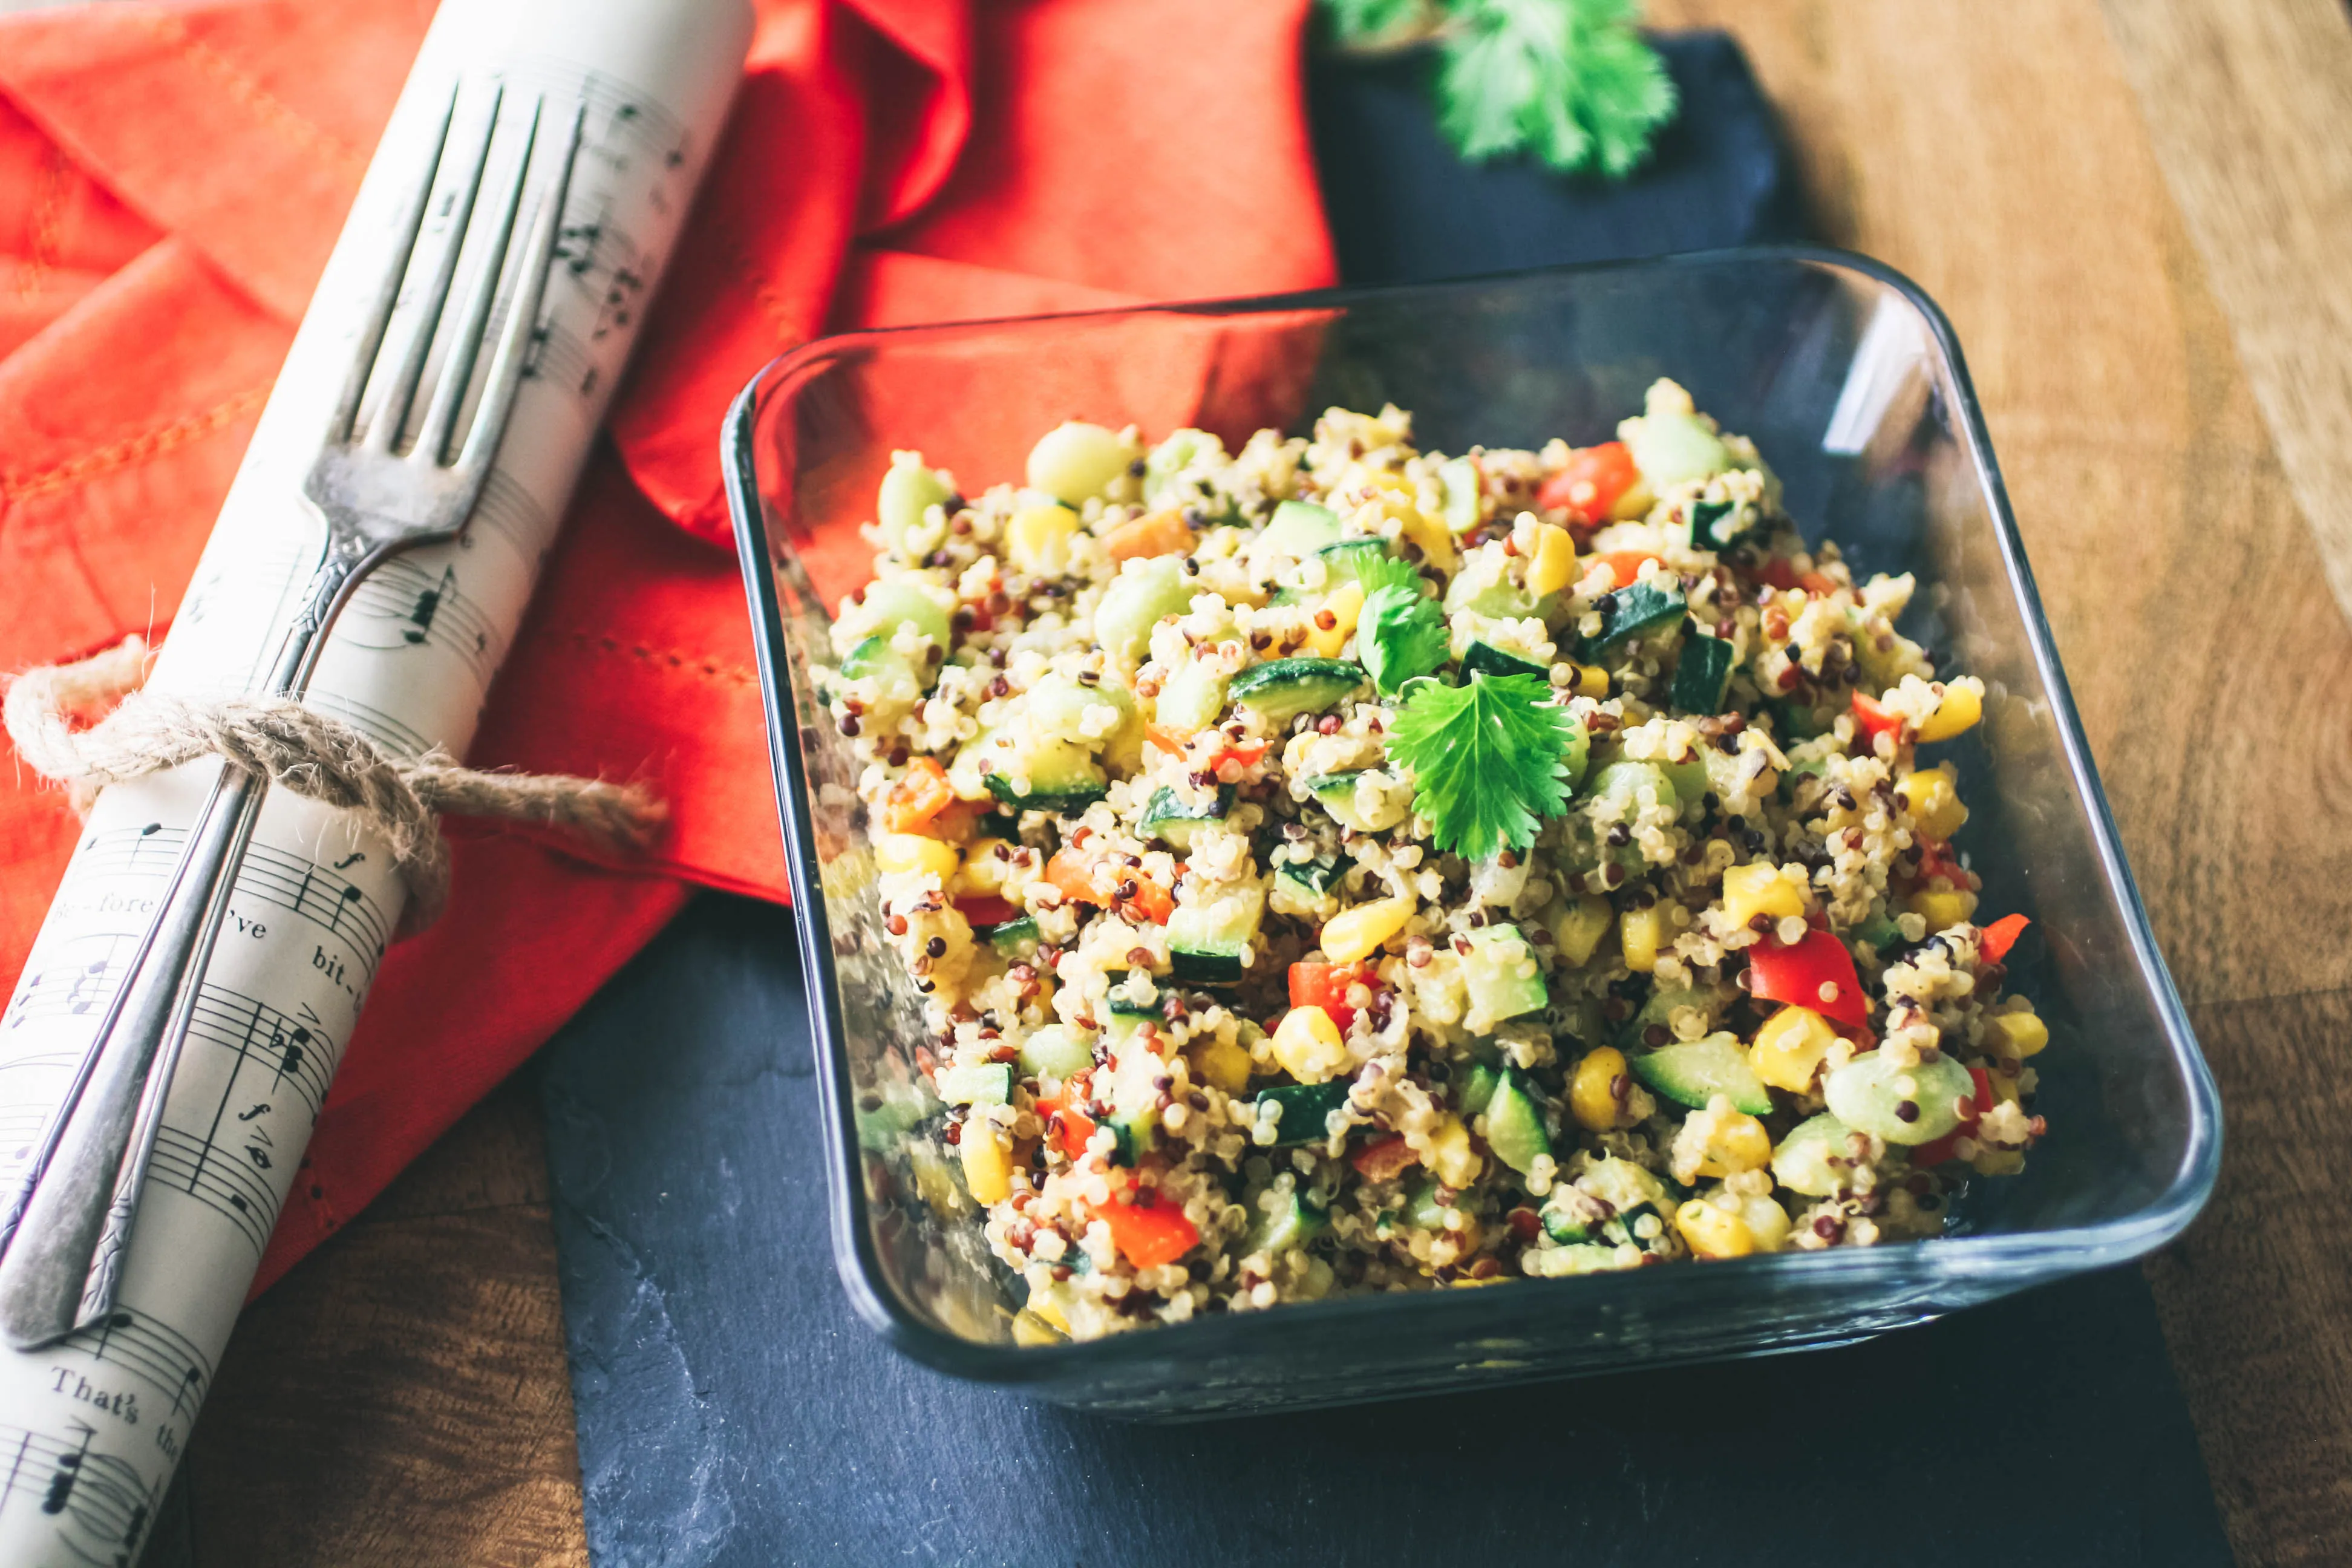 Quinoa Succotash with Spiced Tahini Dressing is such a great side dish that's gluten free and vegan. Quinoa Succotash with Spiced Tahini Dressing is a delightful side!